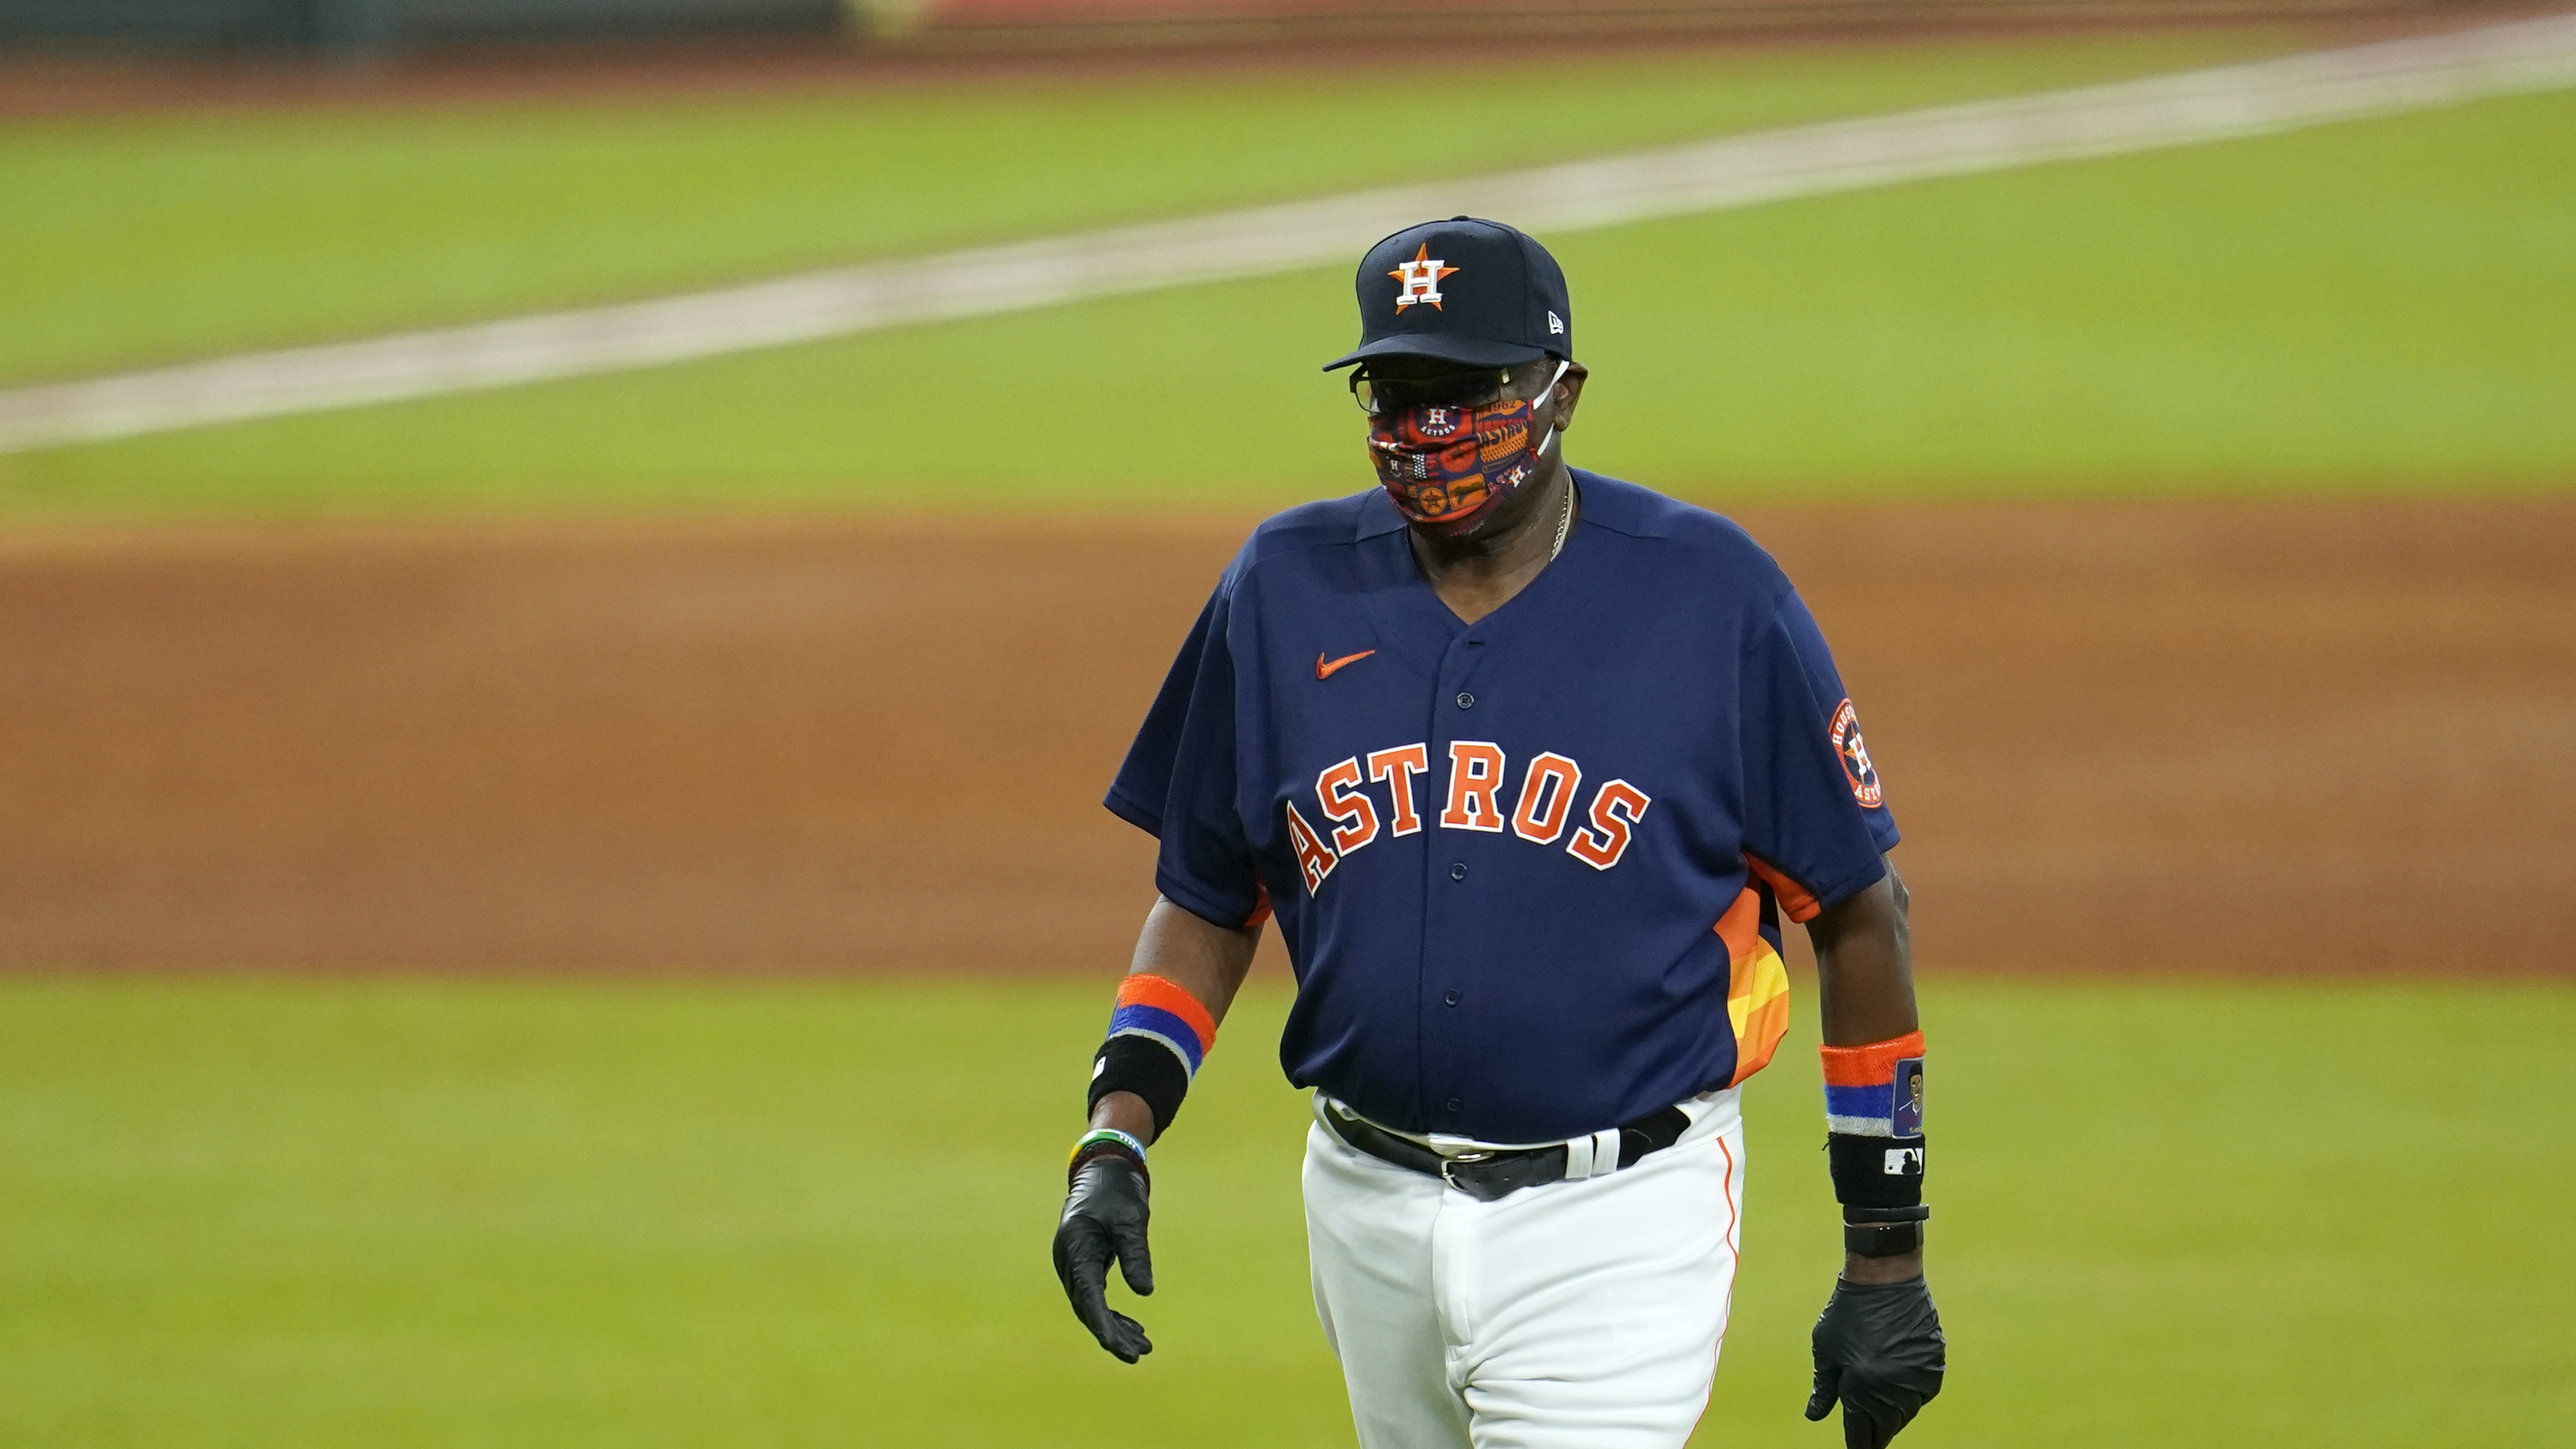 Astros have haters, but Dusty Baker still manages to get love